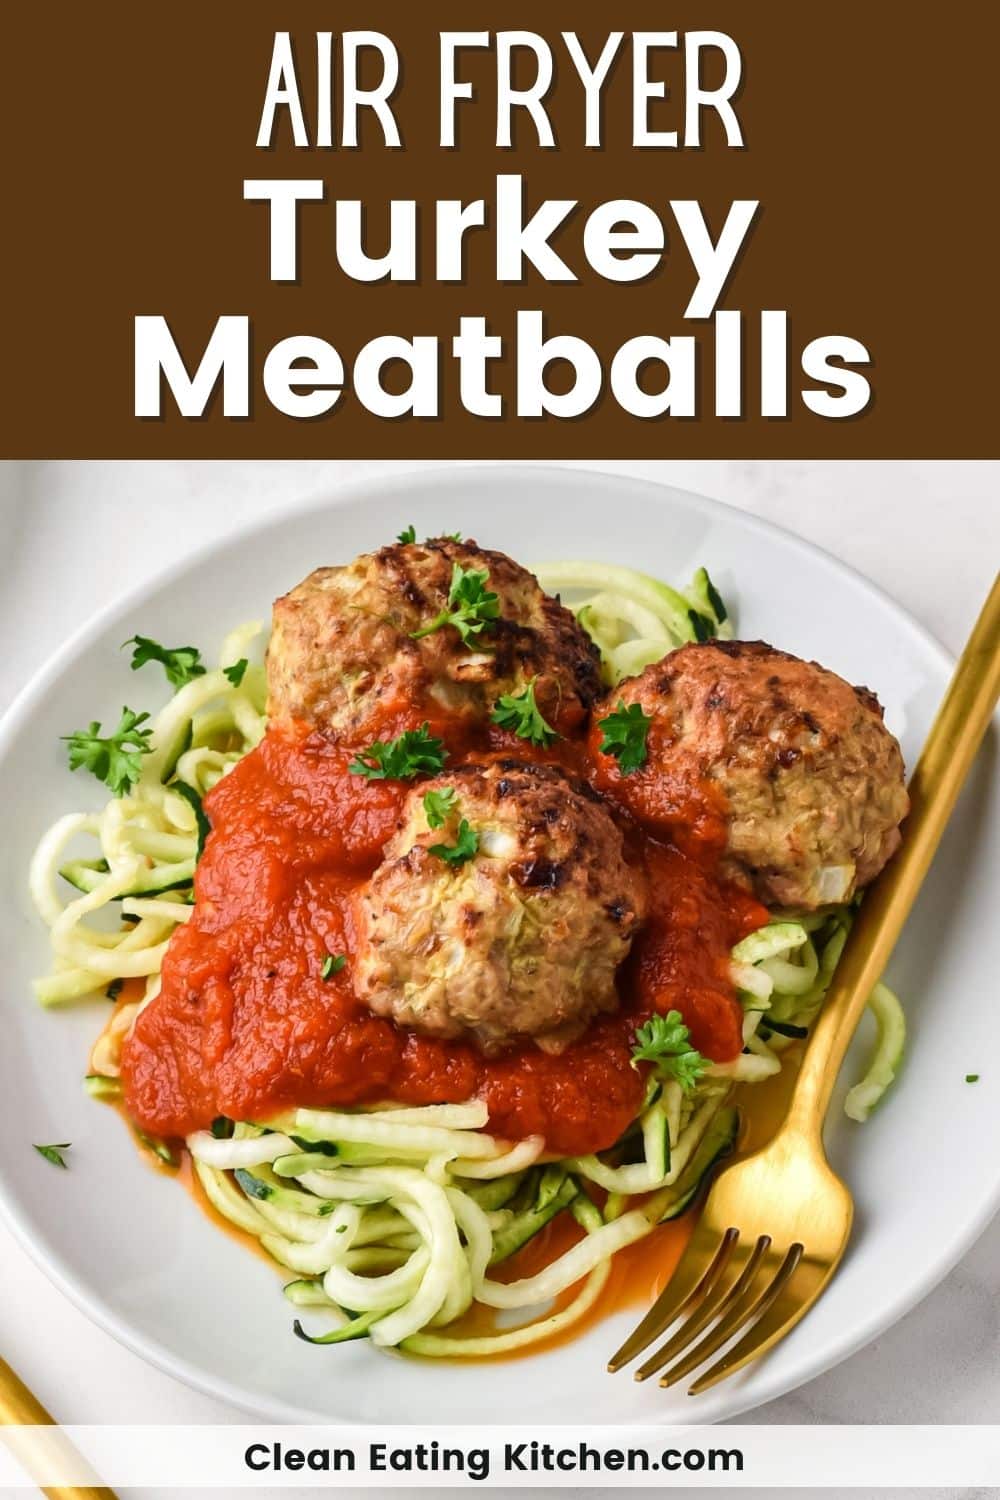 Air Fryer Turkey Meatballs Without Breadcrumbs - Clean Eating Kitchen